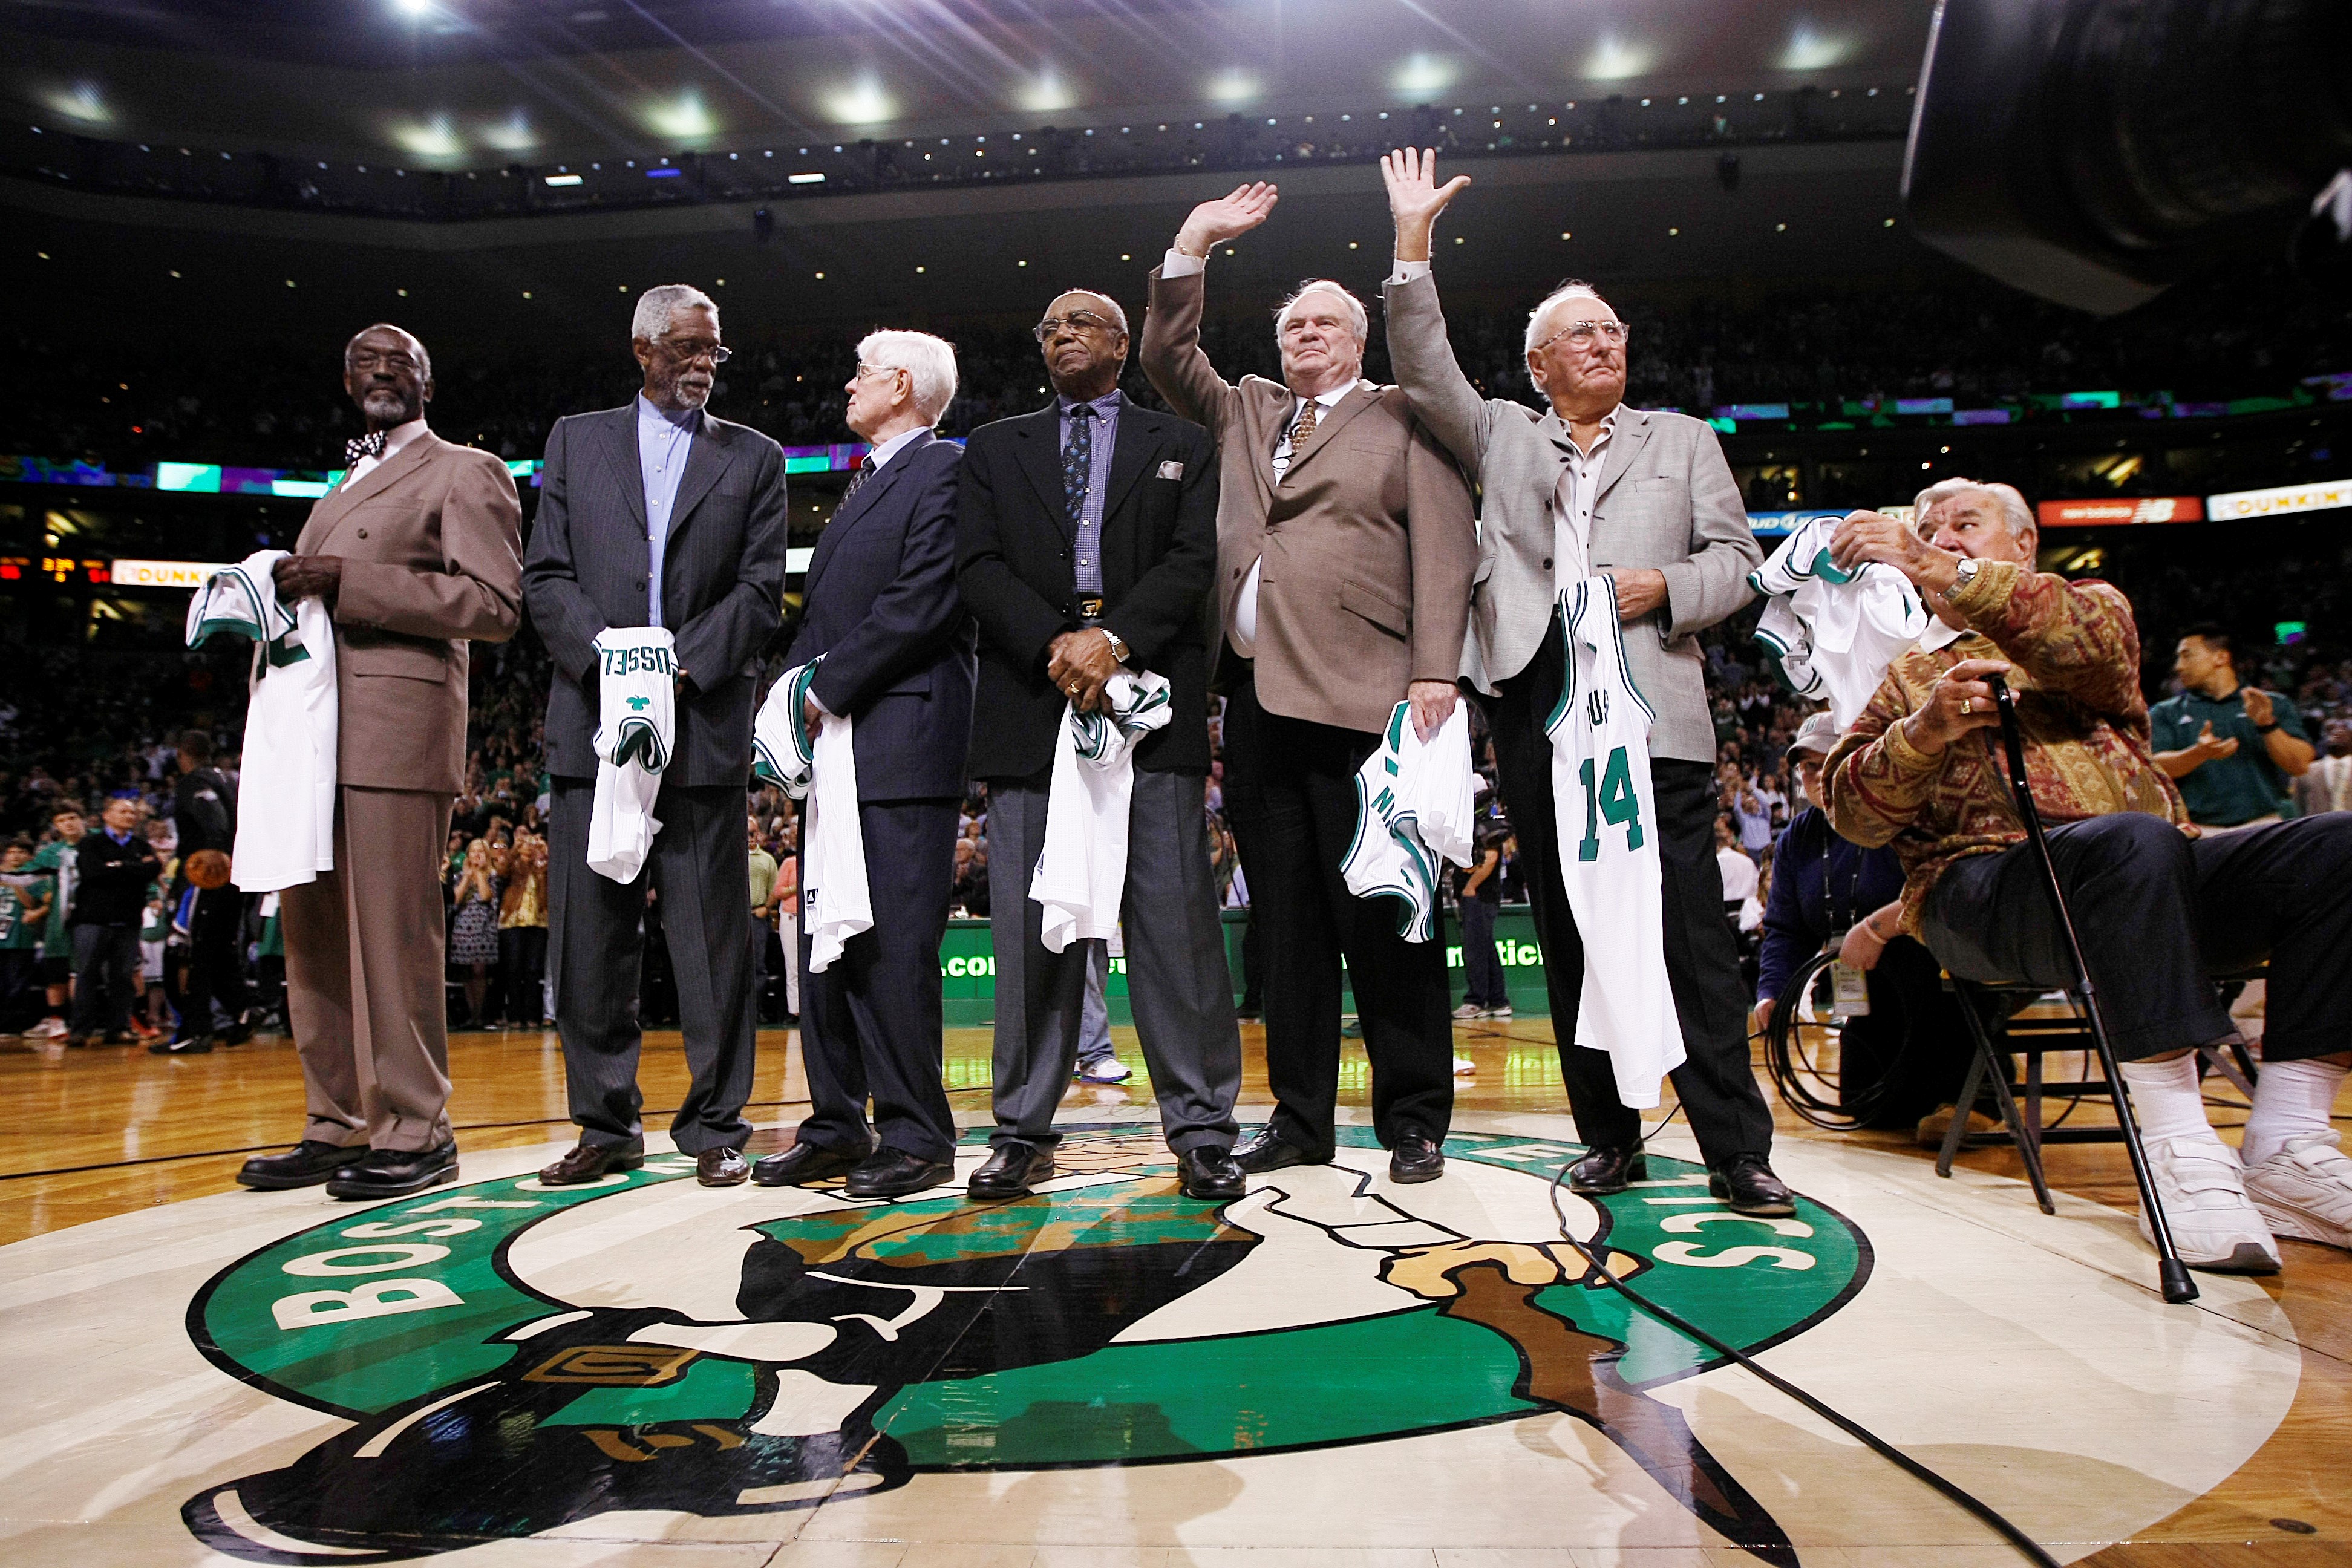 Bob Cousy reflects on race, making amends with Boston Celtics